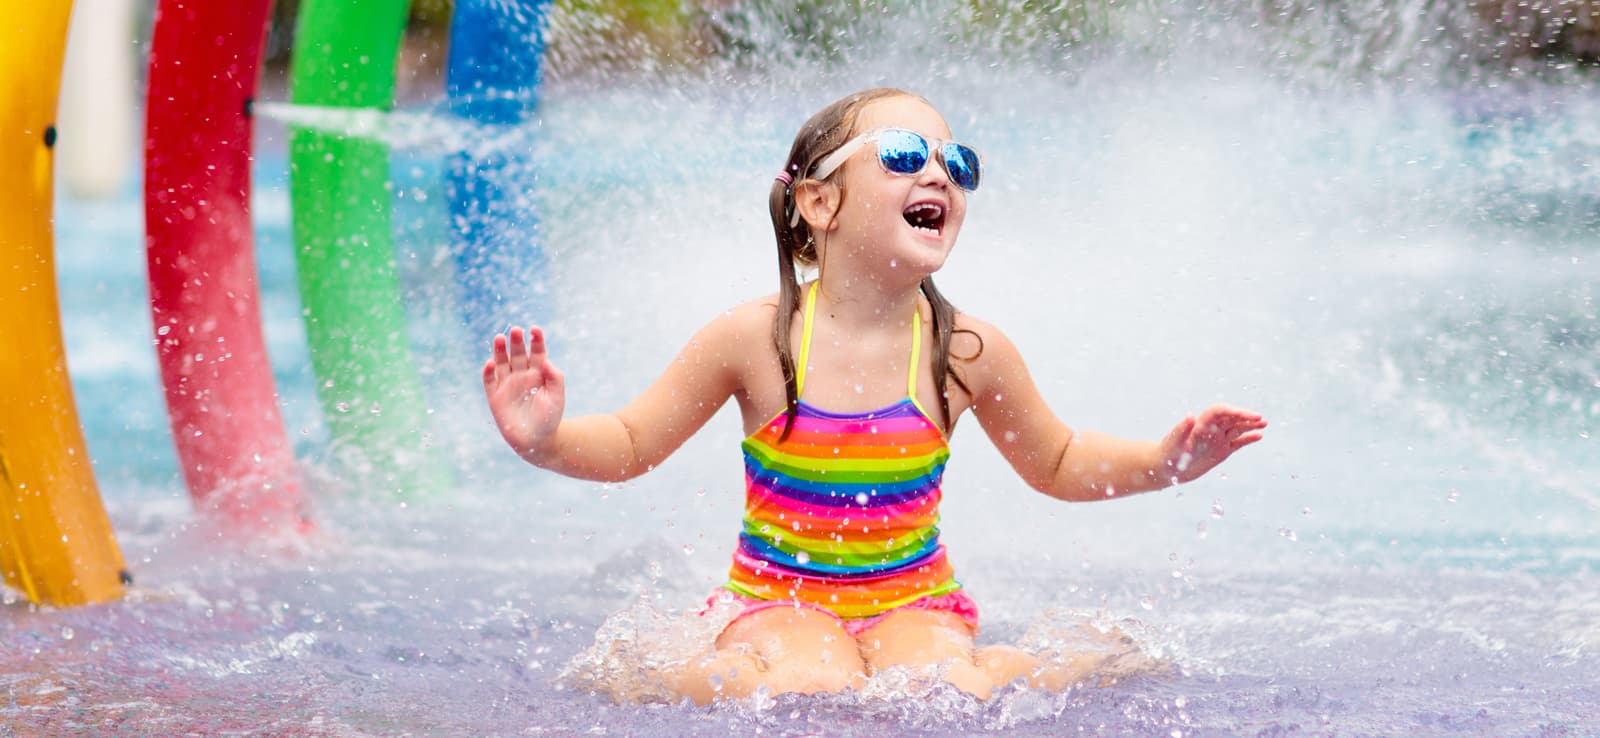 girl wearing sunglasses getting splashed at waterpark